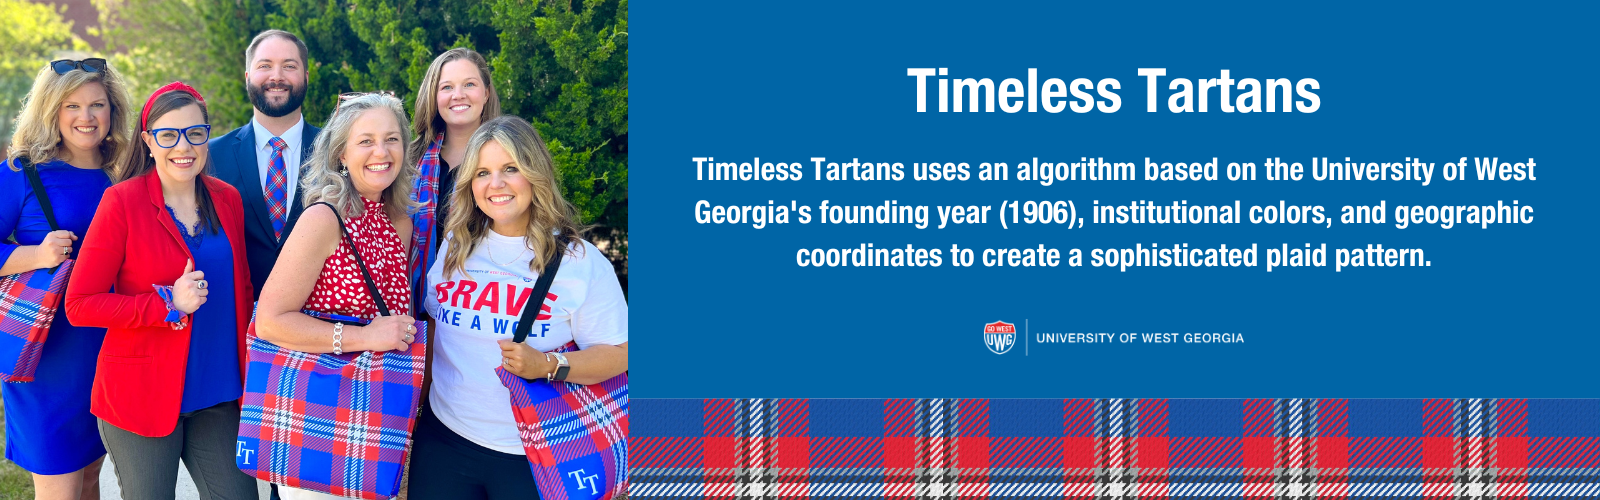 Timeless Tartans uses an algorithm based on the University of West Georgia's founding year (1906), institutional colors, and geographic coordinates to create a sophisticated plaid pattern.